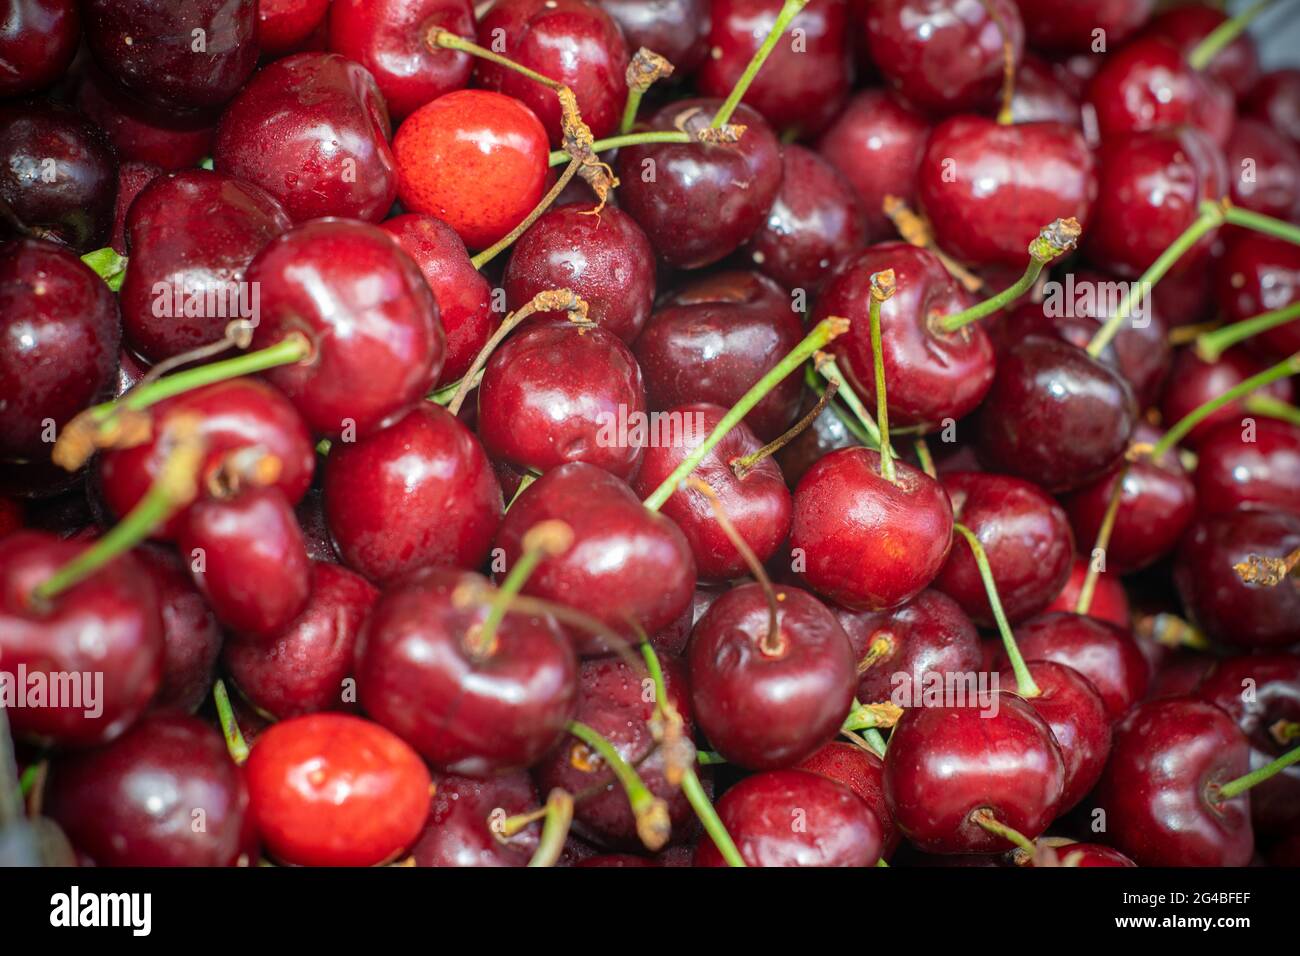 Cherries red and colorful sweet fruits Stock Photo